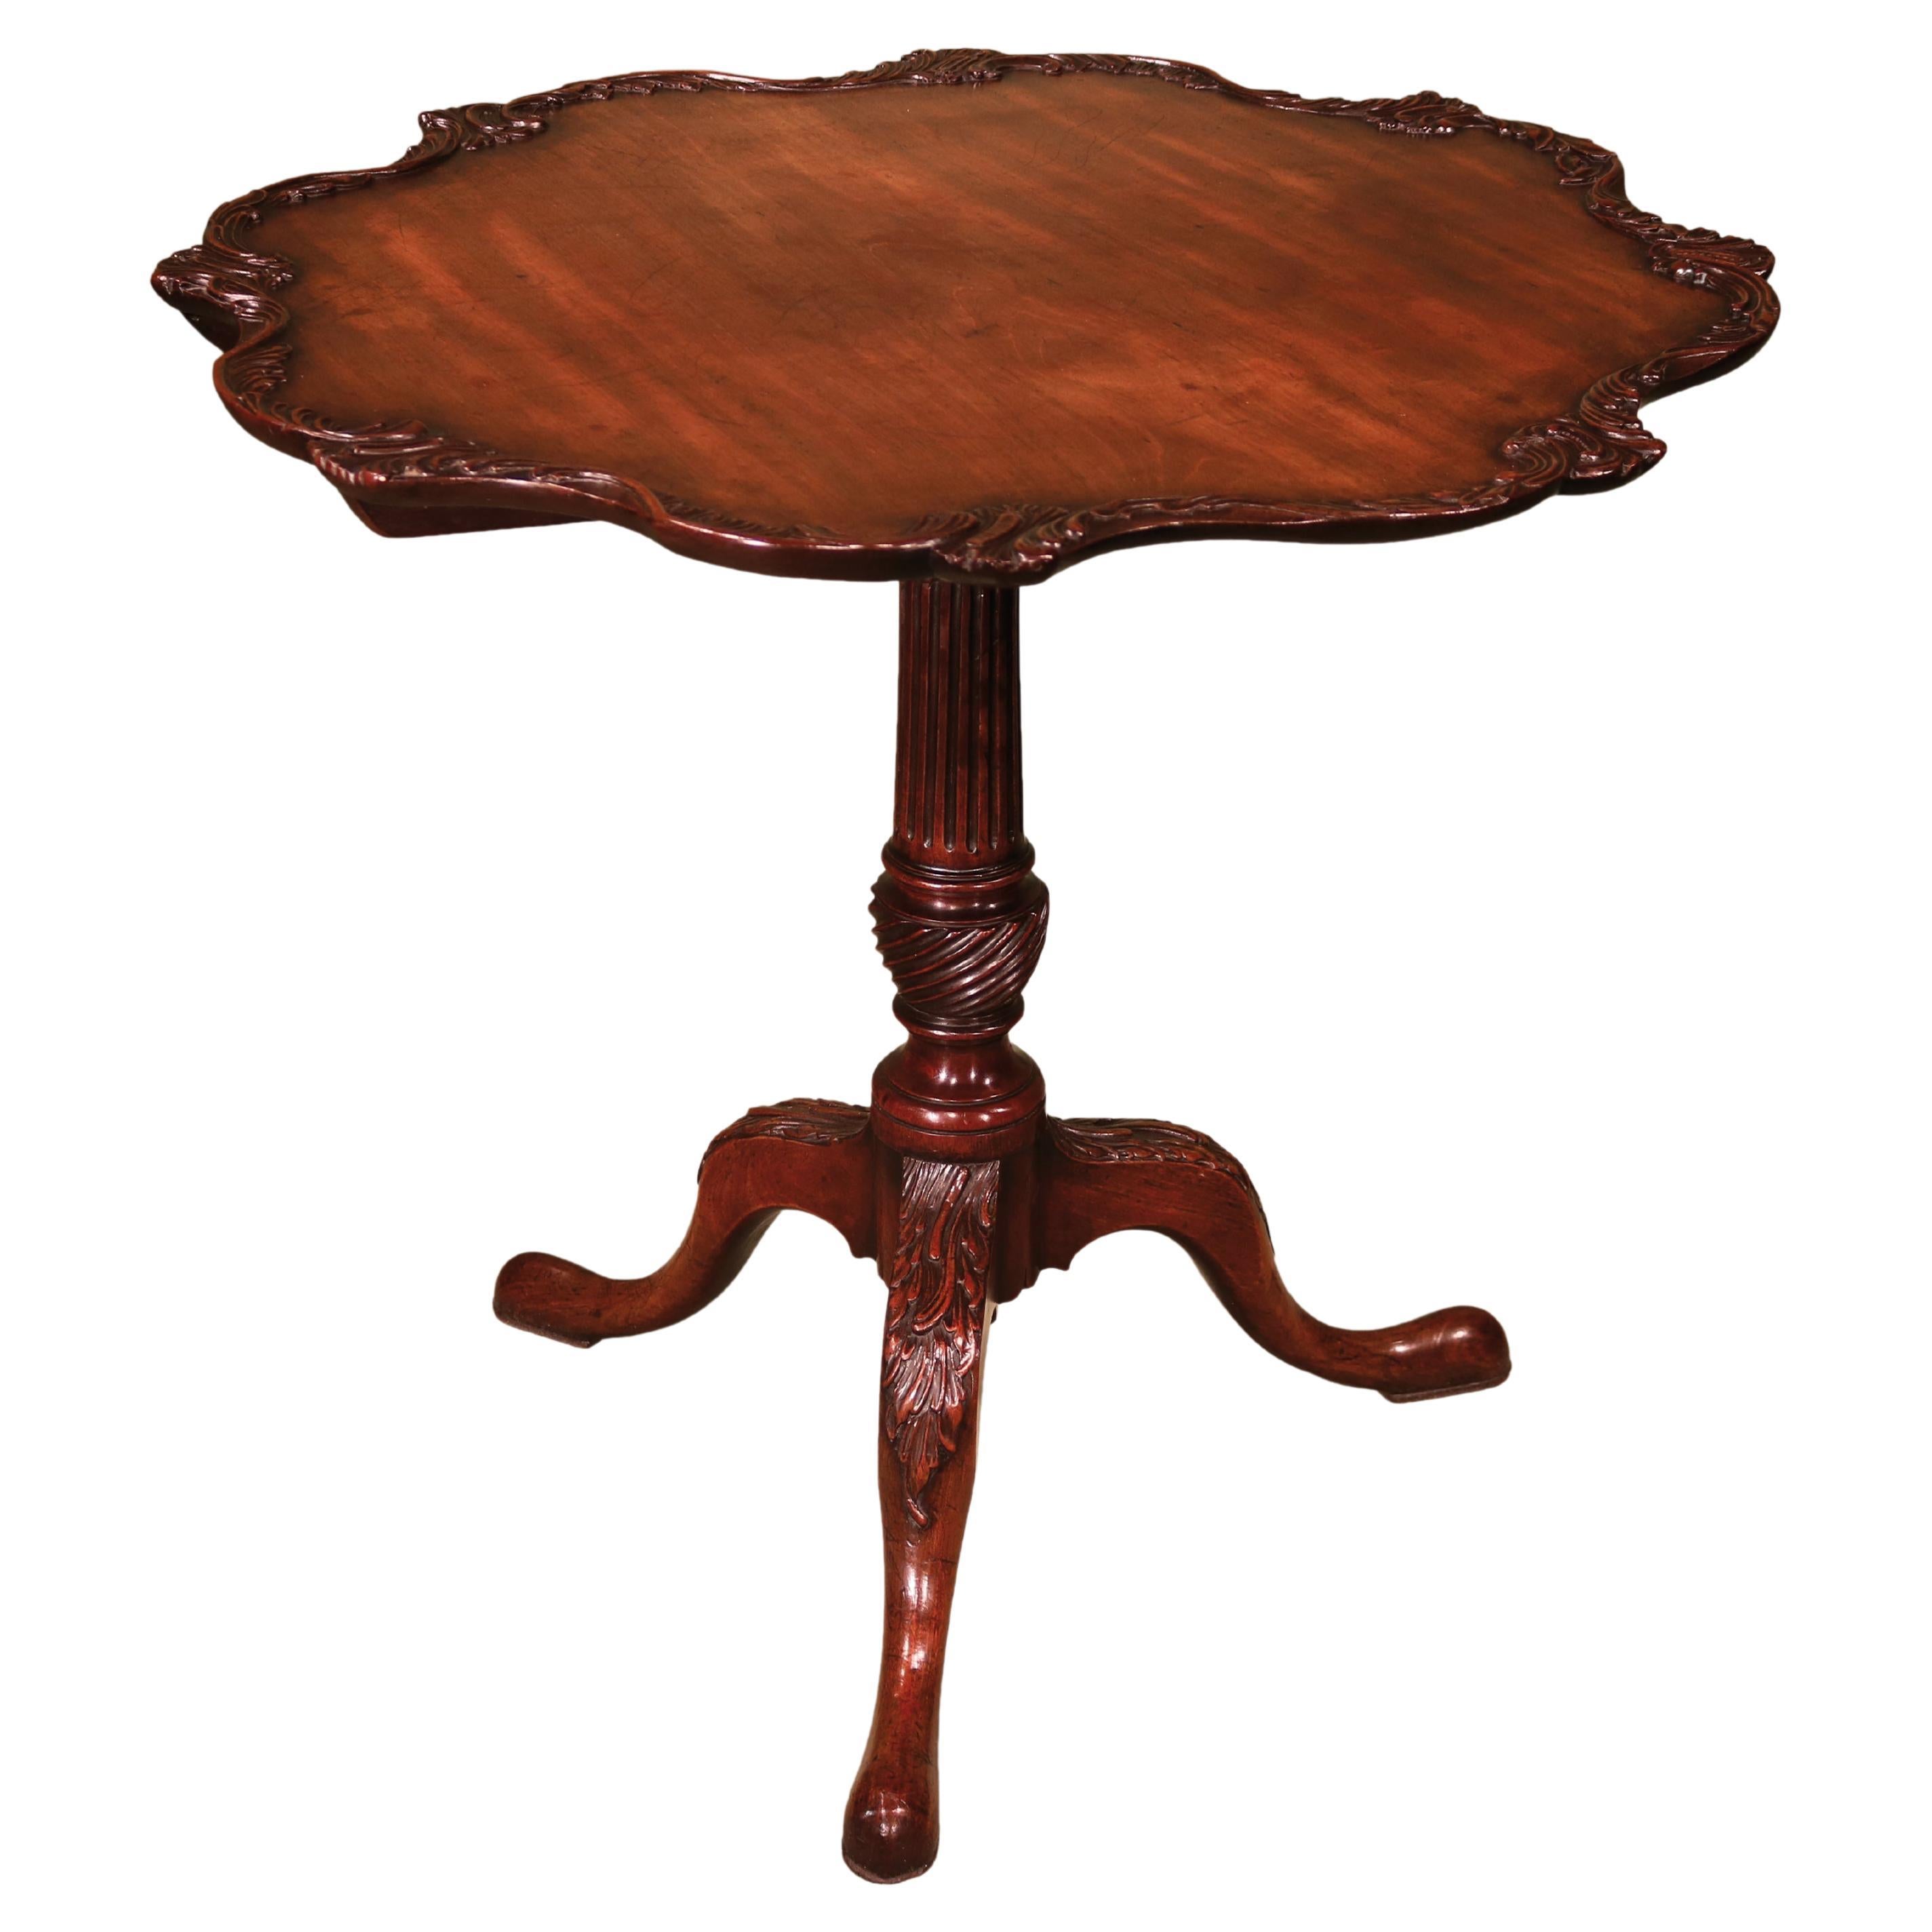 George III Period Carved Mahogany Tripod Table For Sale